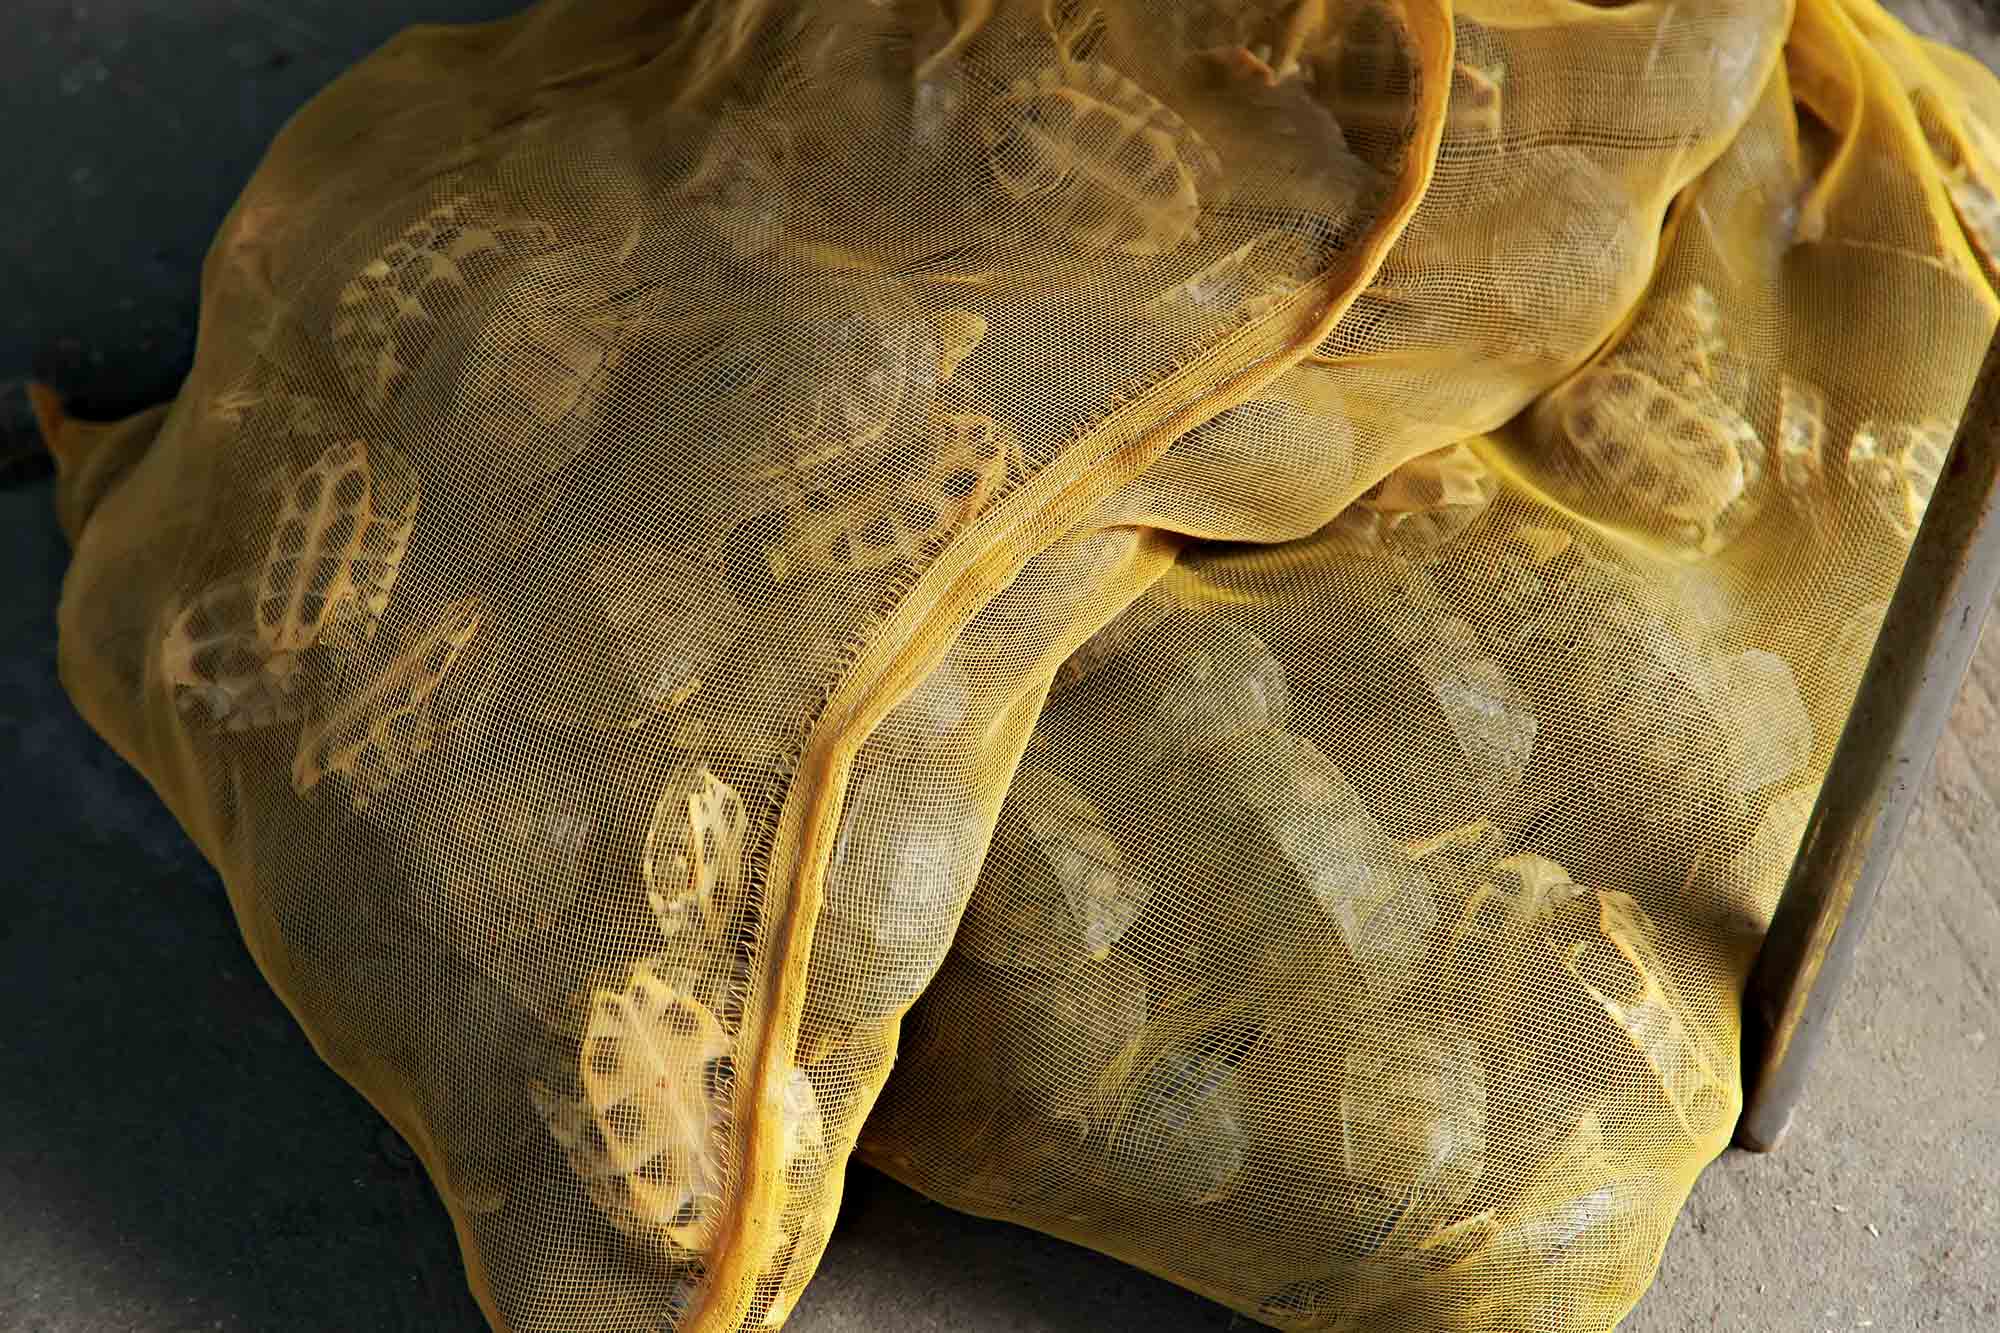 Turtles in a bag at a Chinese animal market. © Ulli Maier & Nisa Maier